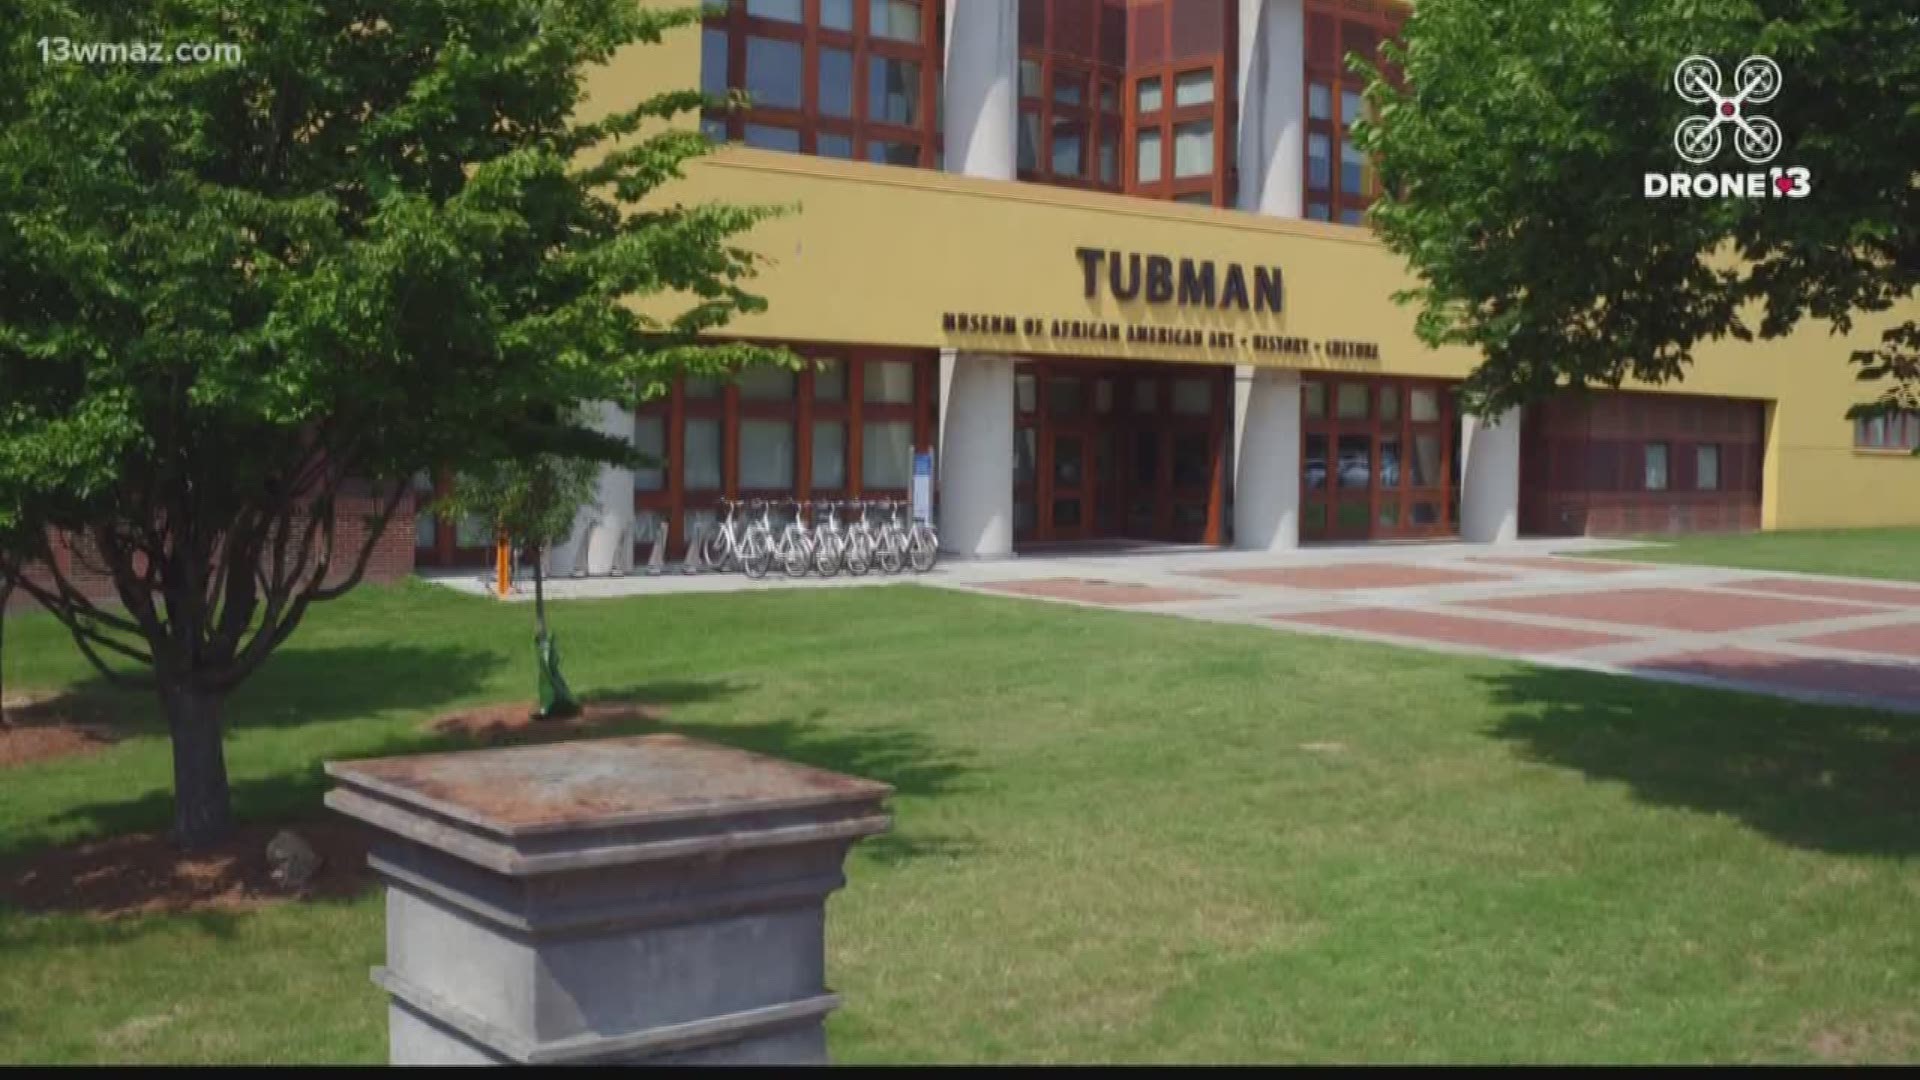 Harriet Tubman's great nephew Dr. A.D. Brickler visited the Tubman Museum in Macon Saturday.